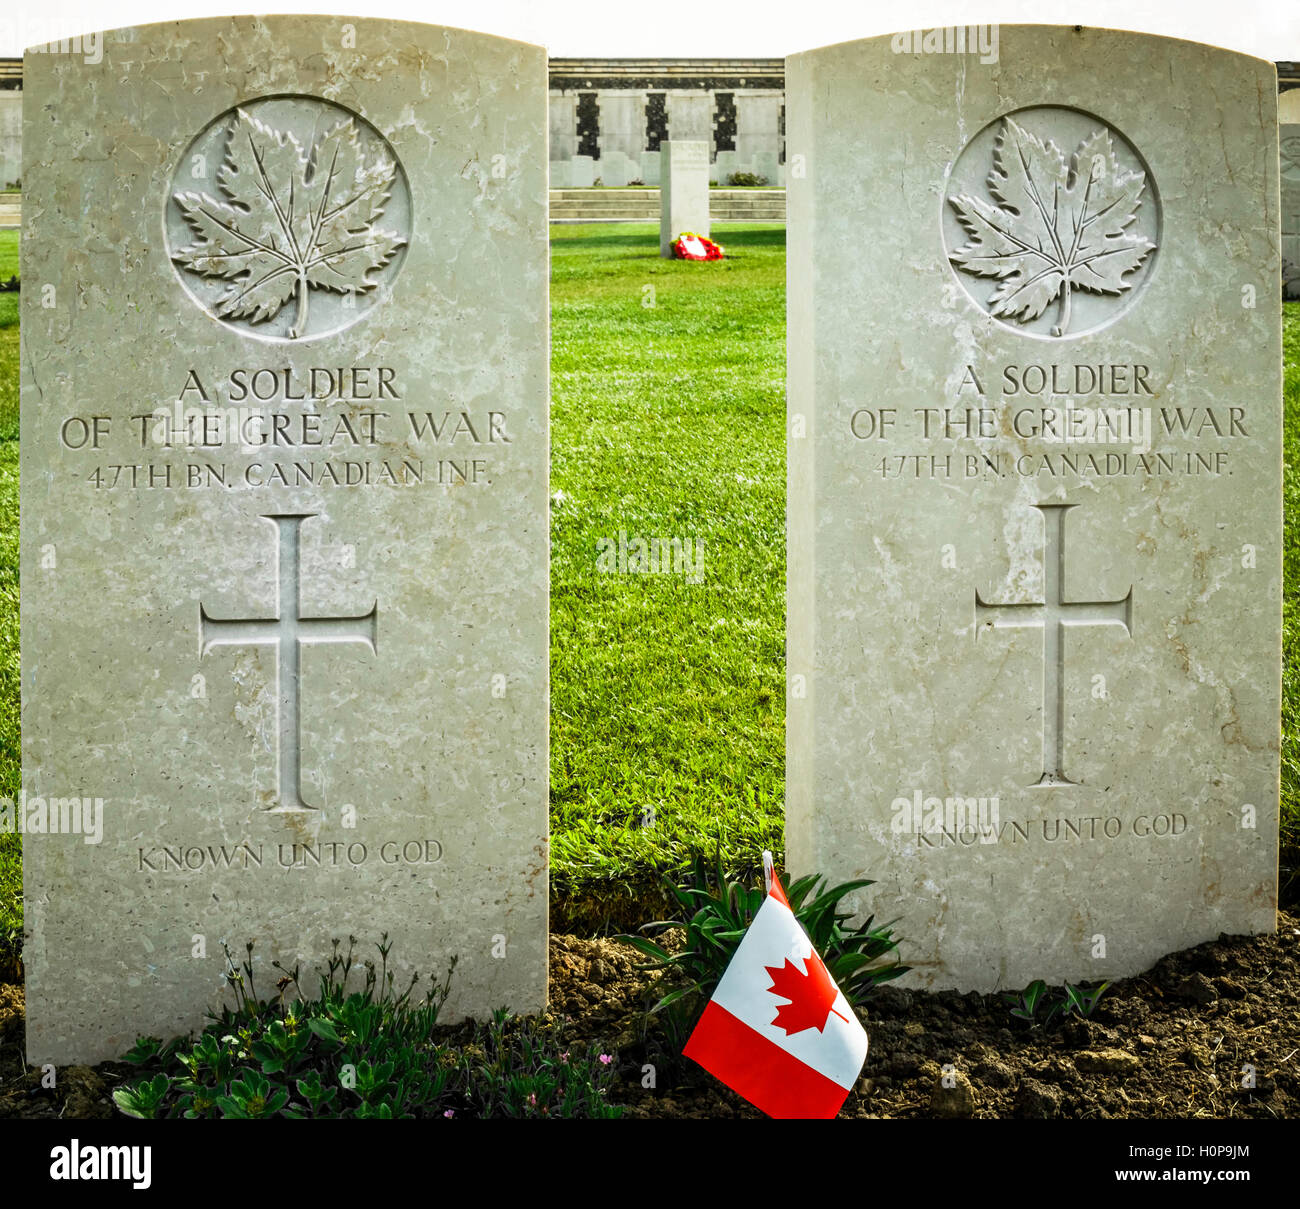 Graves of two Canadian soldiers who were casualties of World War 1. They are buried in a cemetery in Flanders Fields, Belgium. Stock Photo